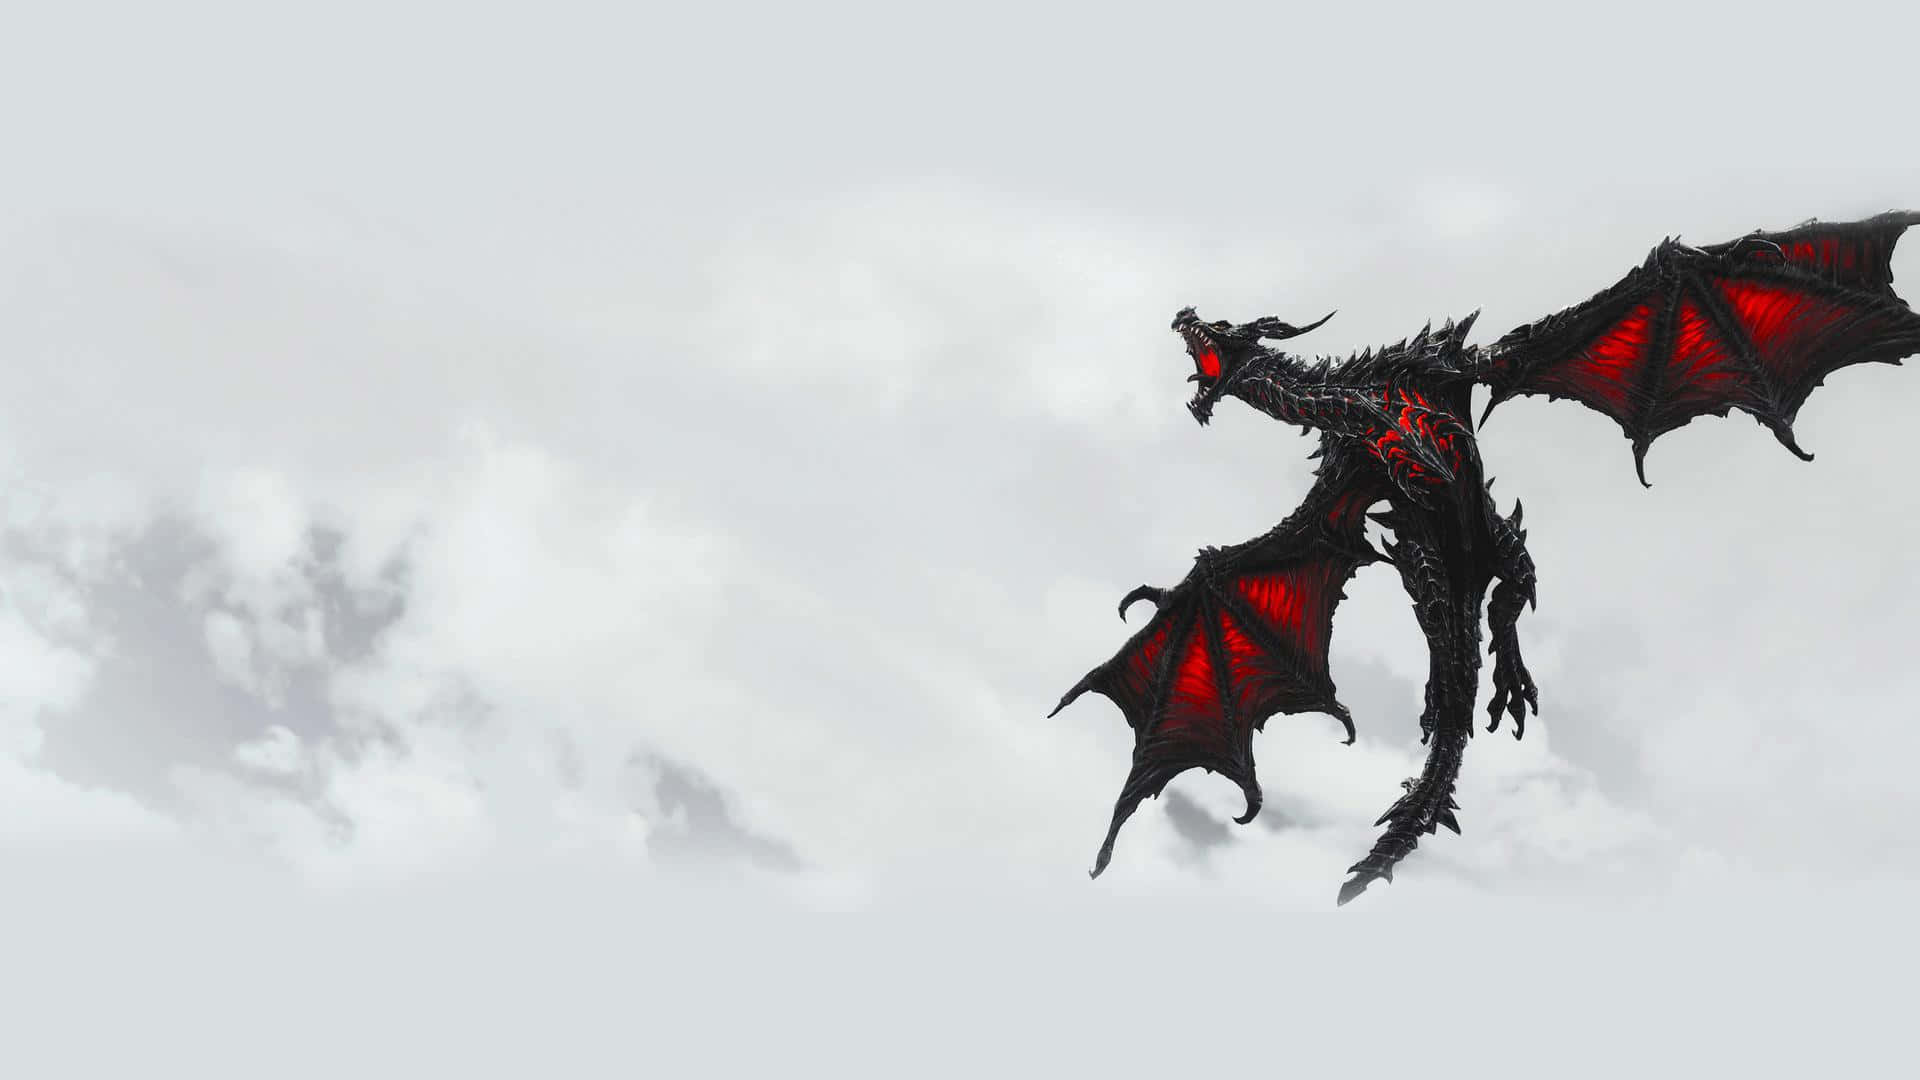 Alduin, the World Eater, menacingly soaring above the mountains of Skyrim Wallpaper